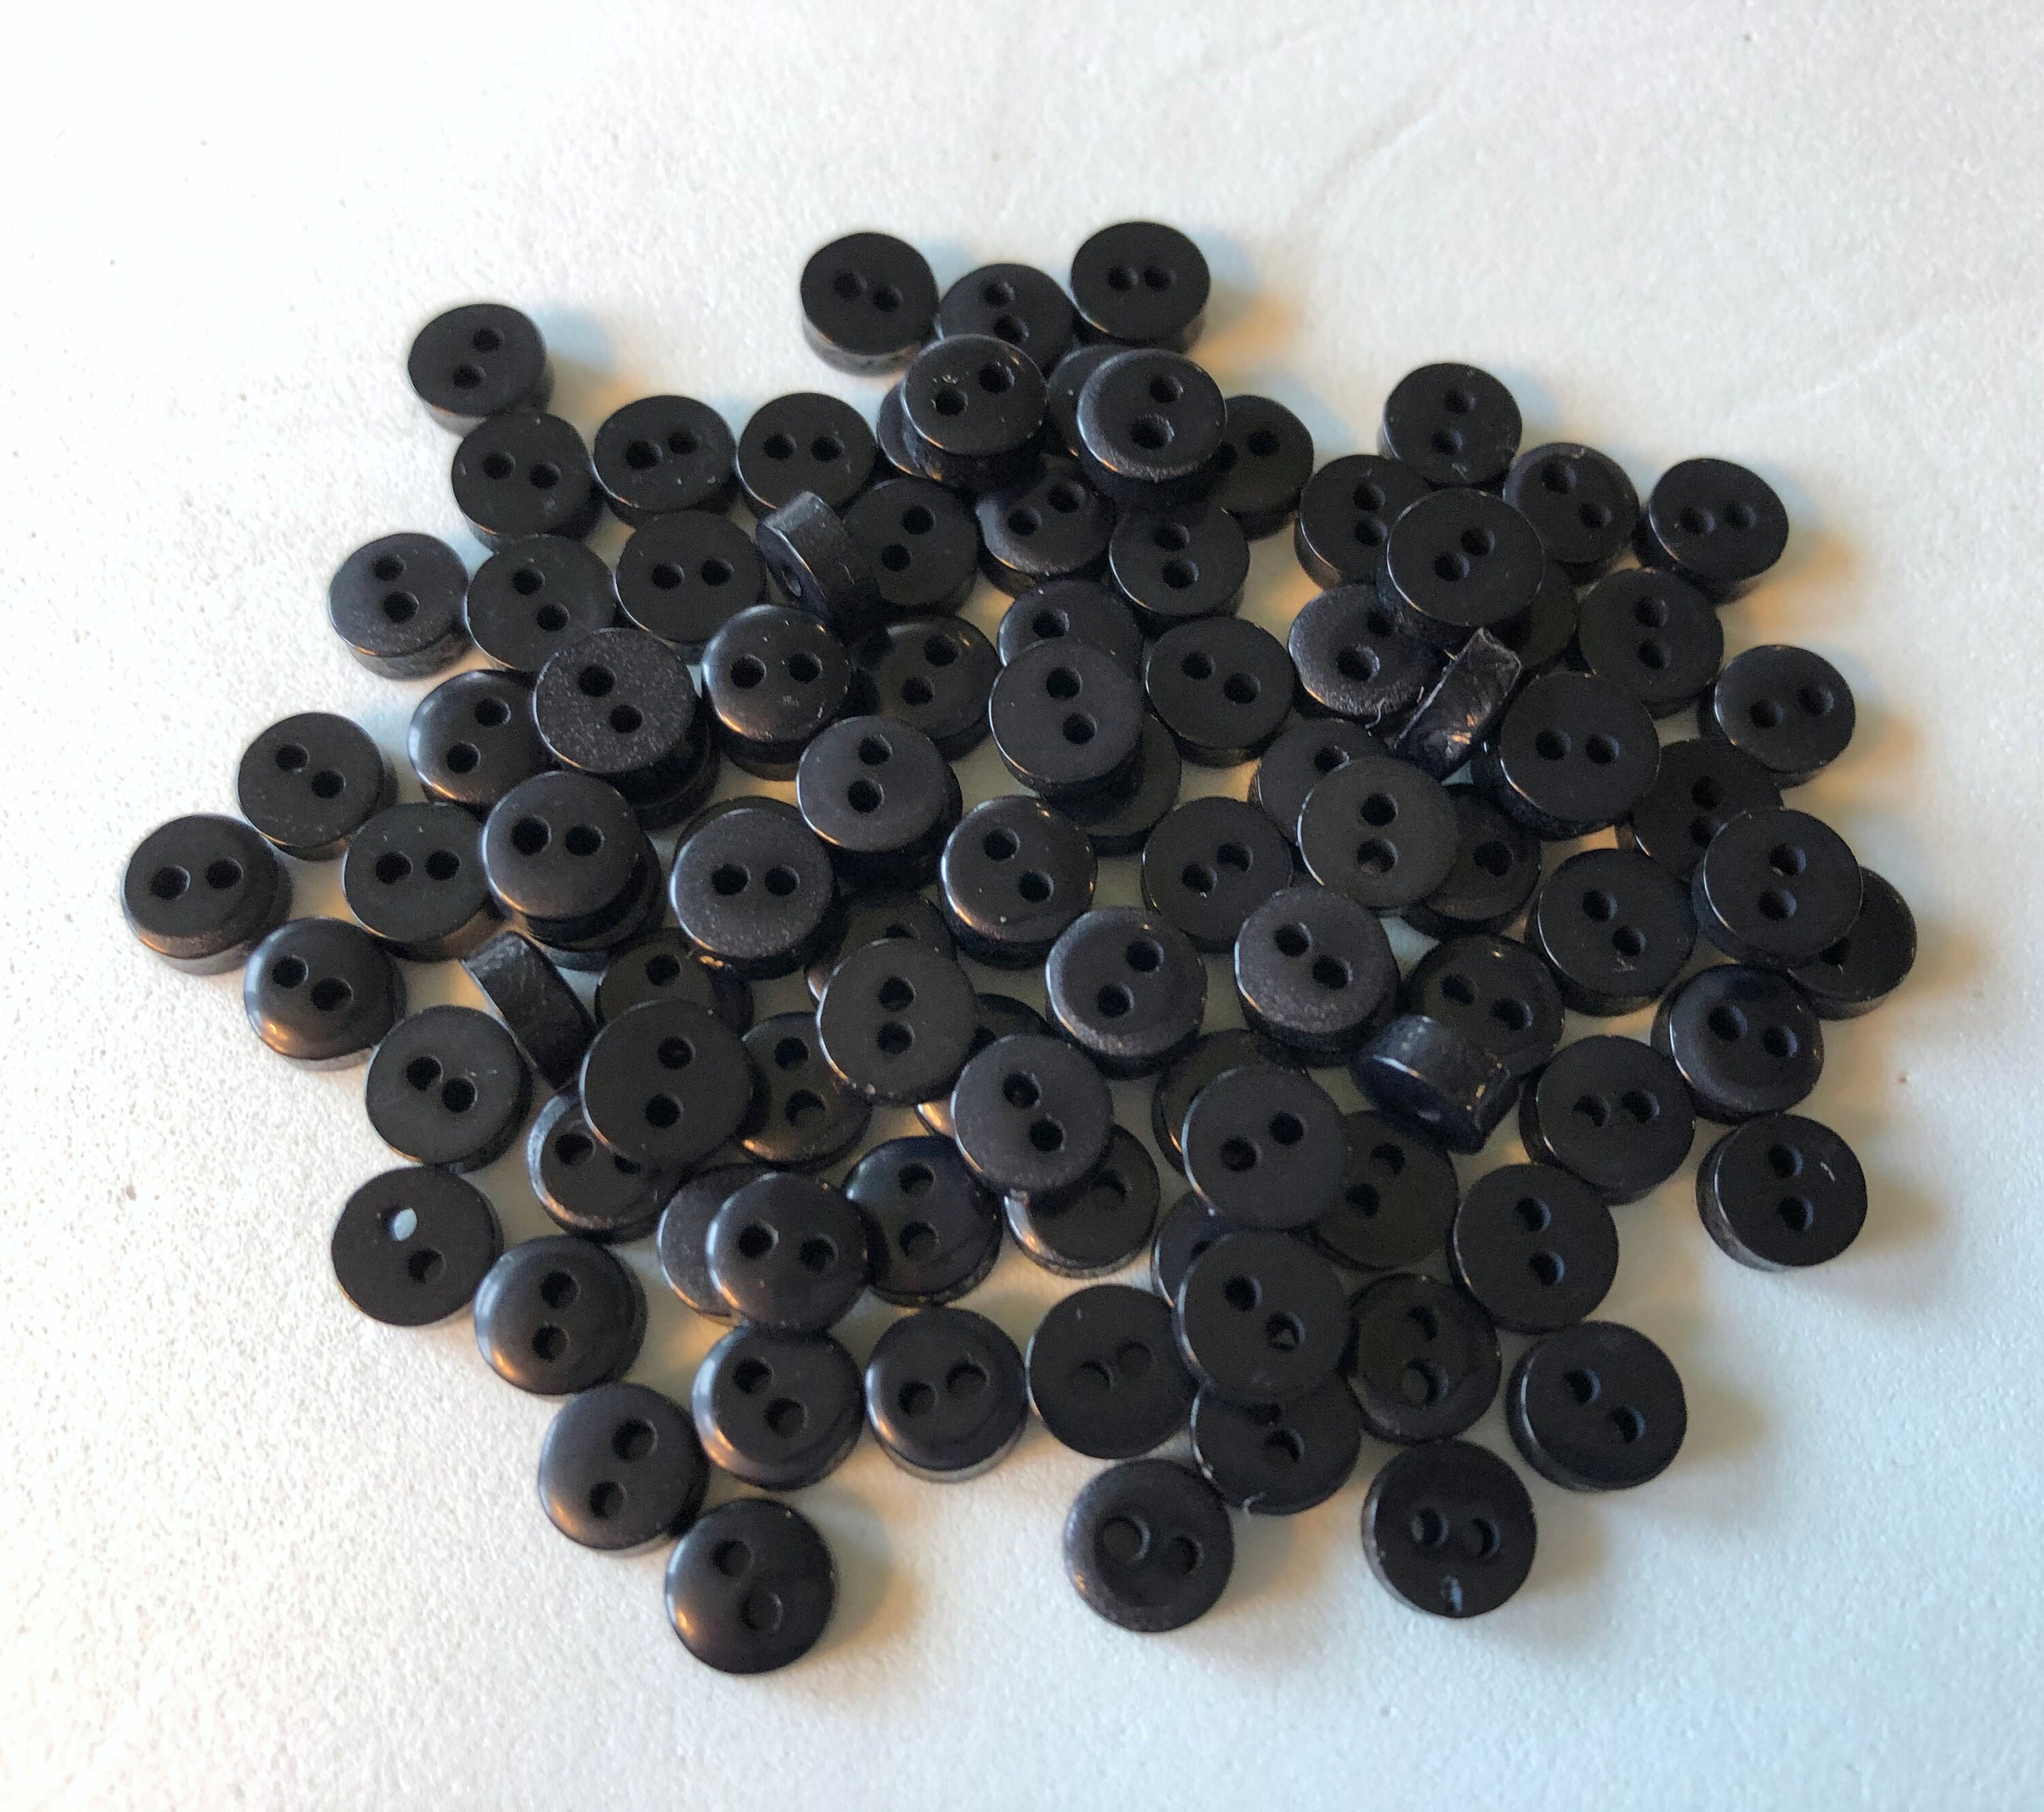 50 Pcs Tiny Buttons, Plastic Doll Buttons 2 Holes Sewing Buttons Round  Scrapbooking Buttons, DIY Crafts Buttons Sewing Accessories(5mm,Grass Green)